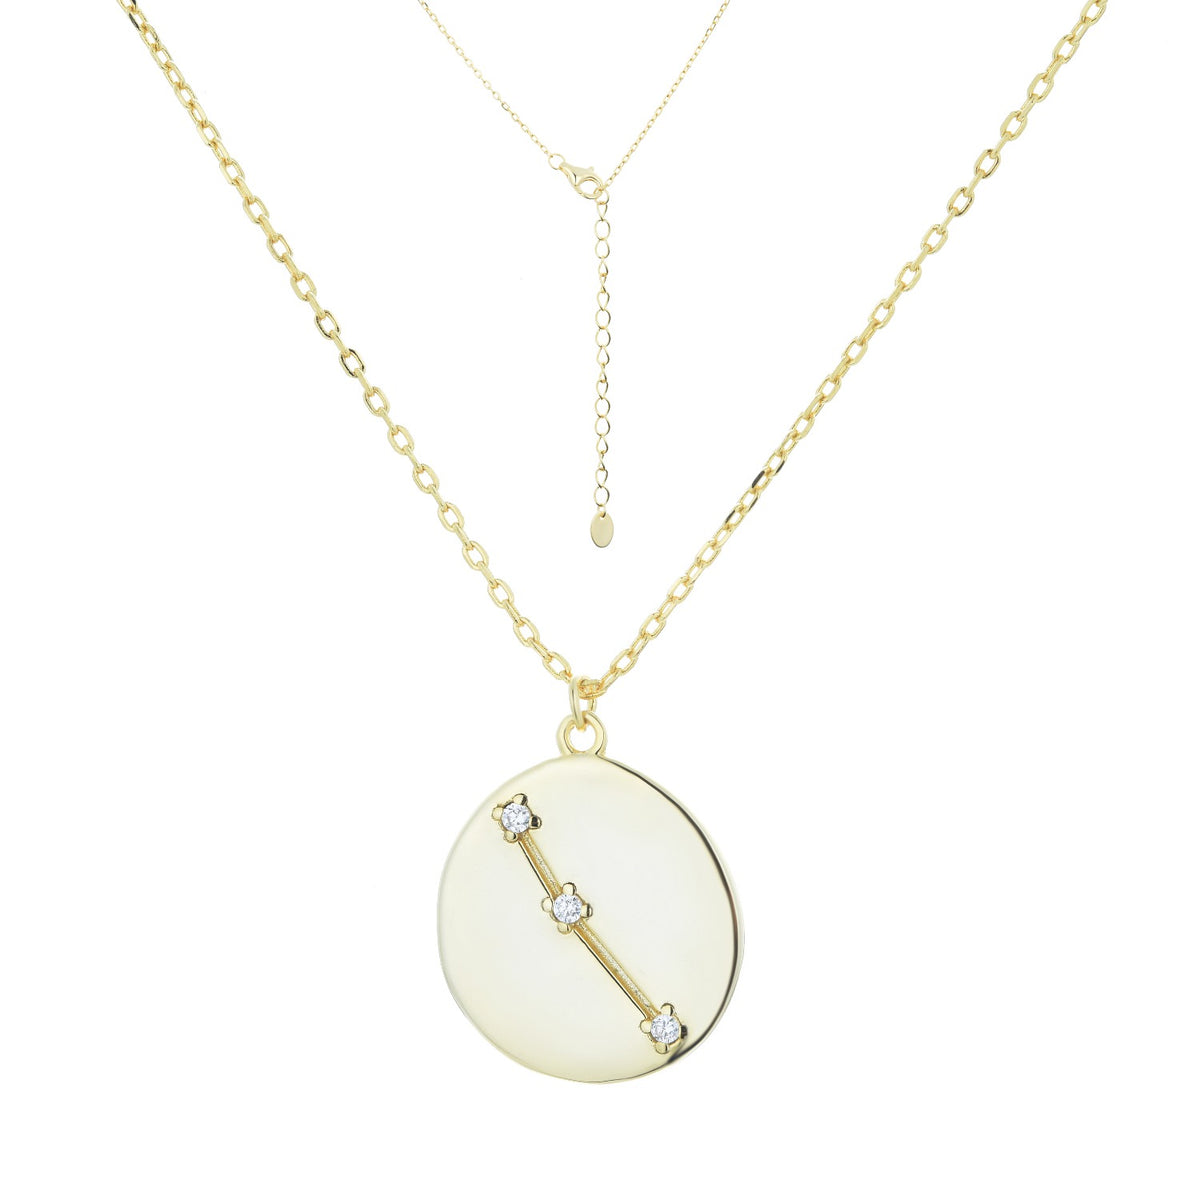 ARIES - ΚΡΙΟΣ Pendant | White CZ | 18K Gold Plated 925 Silver